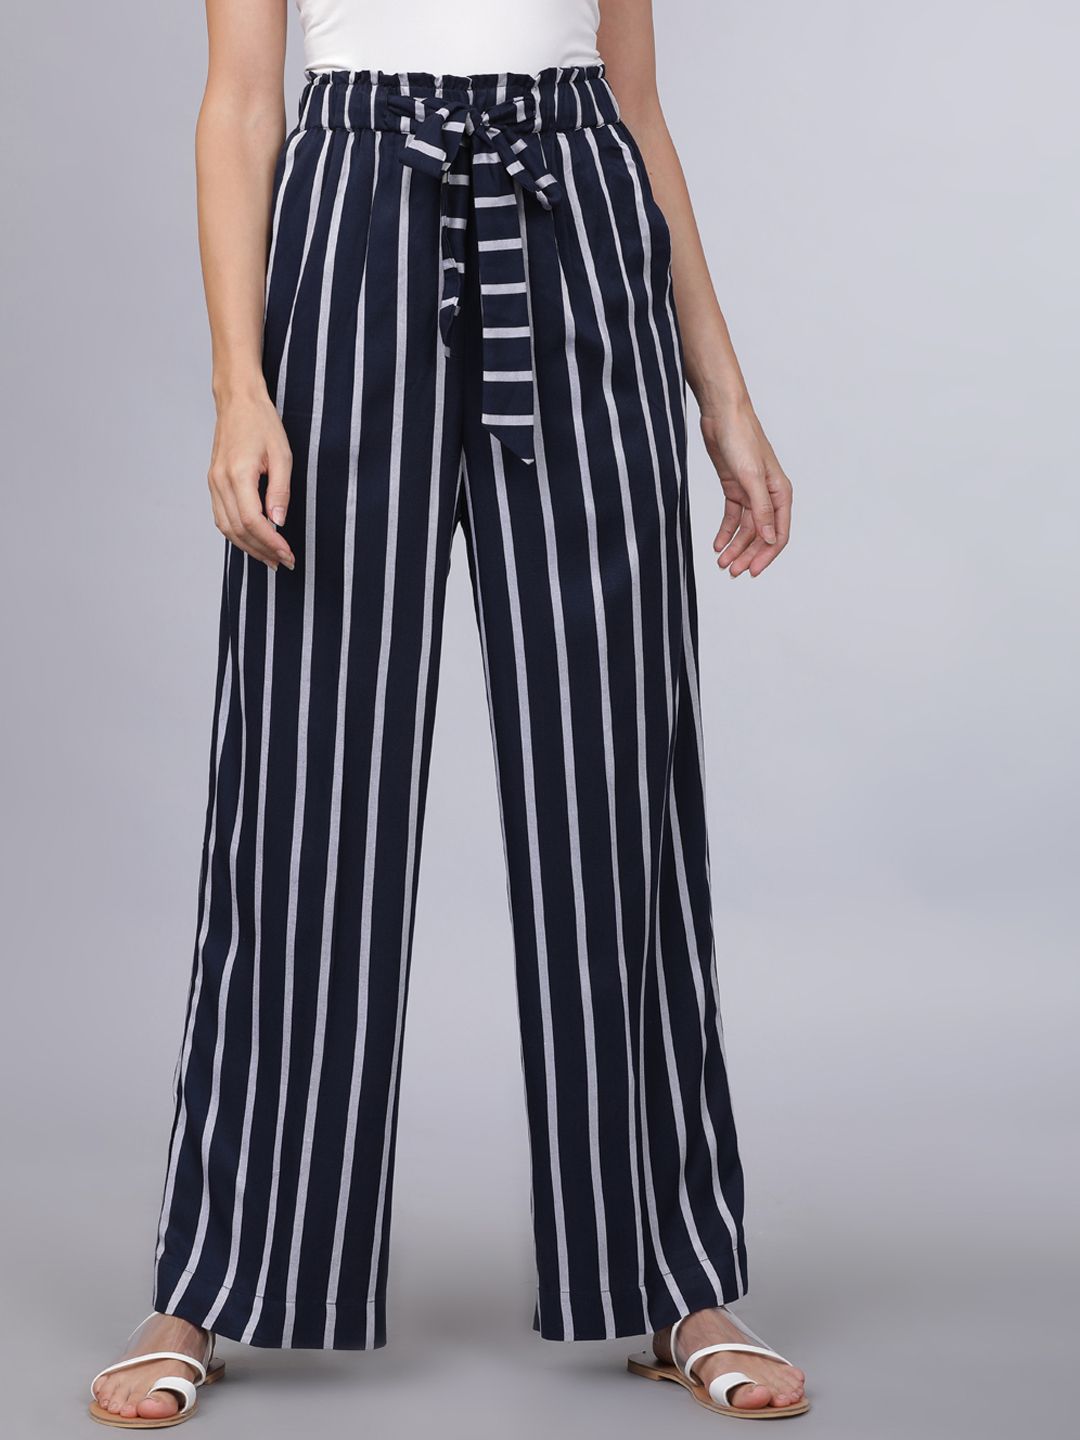 Tokyo Talkies Women Navy Blue & White Striped Parallel Trousers Price in India